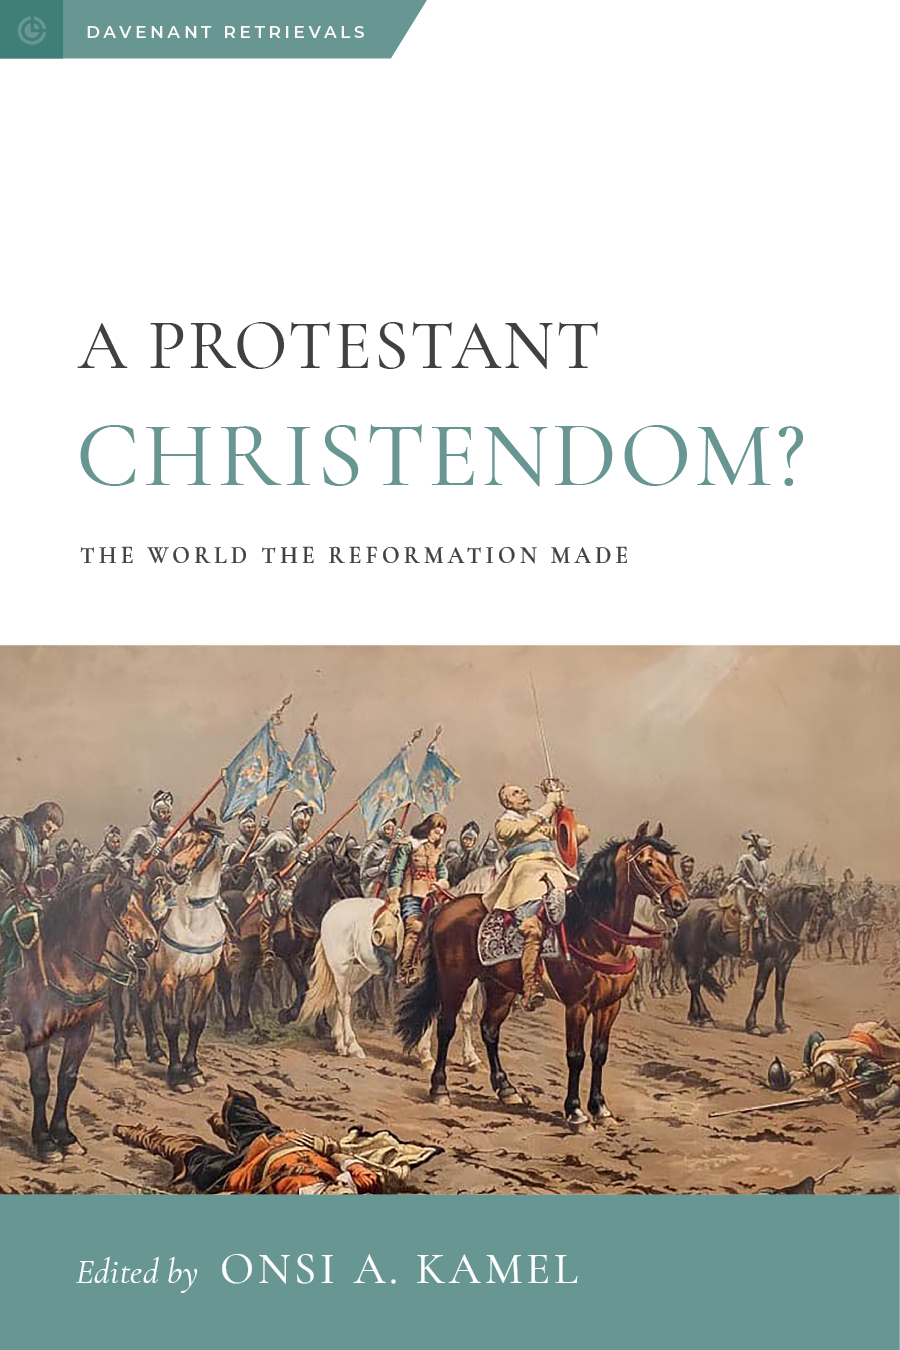 A Protestant Christendom? The World the Reformation Made